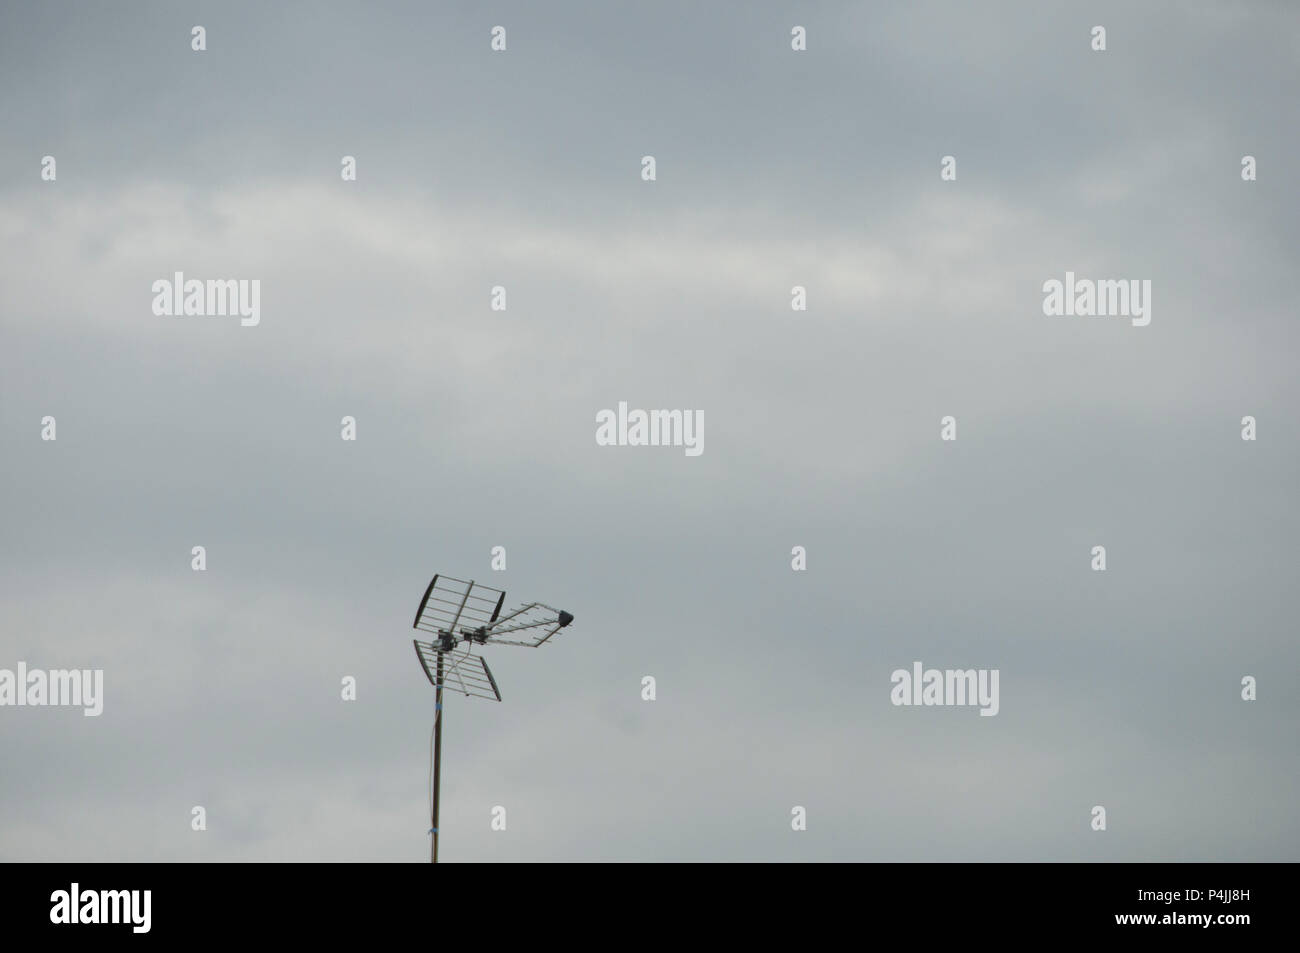 Old style TV aerial / antenna on top of black tiled roof against cloudy sky. Stock Photo